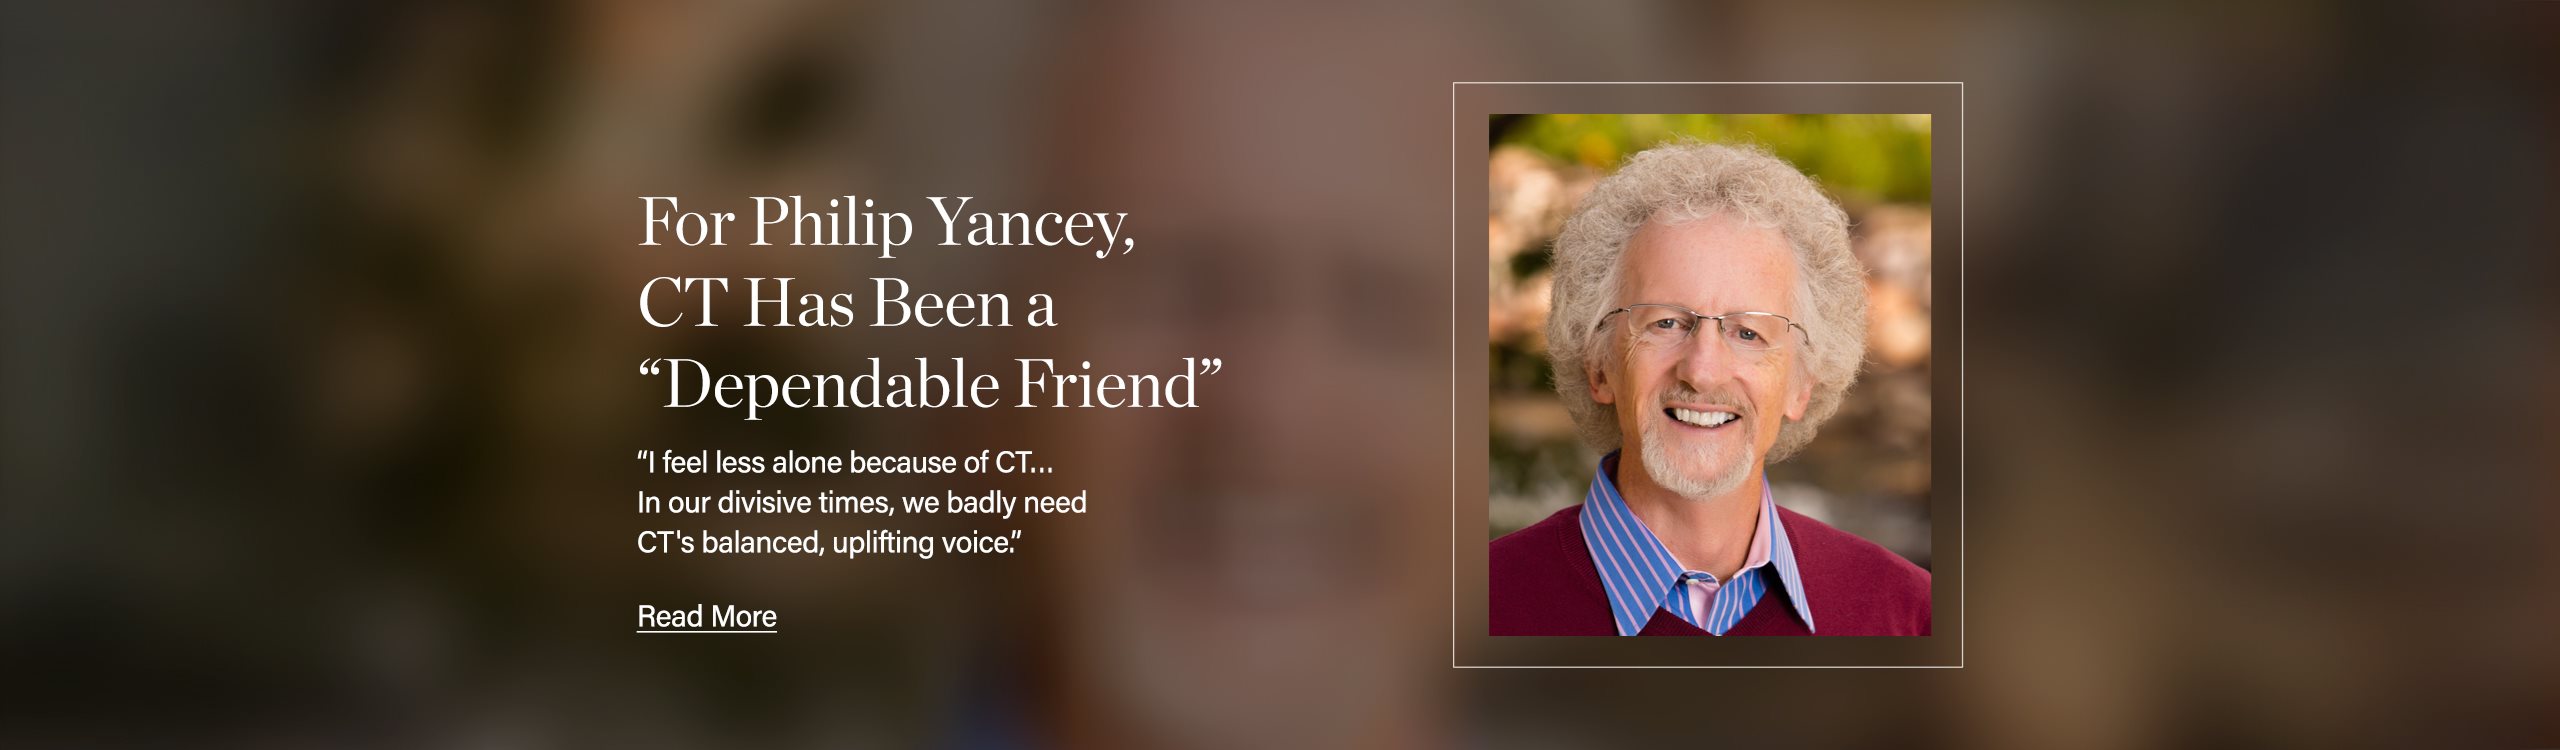 For Philip Yancey, CT Has Been a “Dependable Friend”: “I feel less alone because of CT…In our divisive times, we badly need CT's balanced, uplifting voice.”